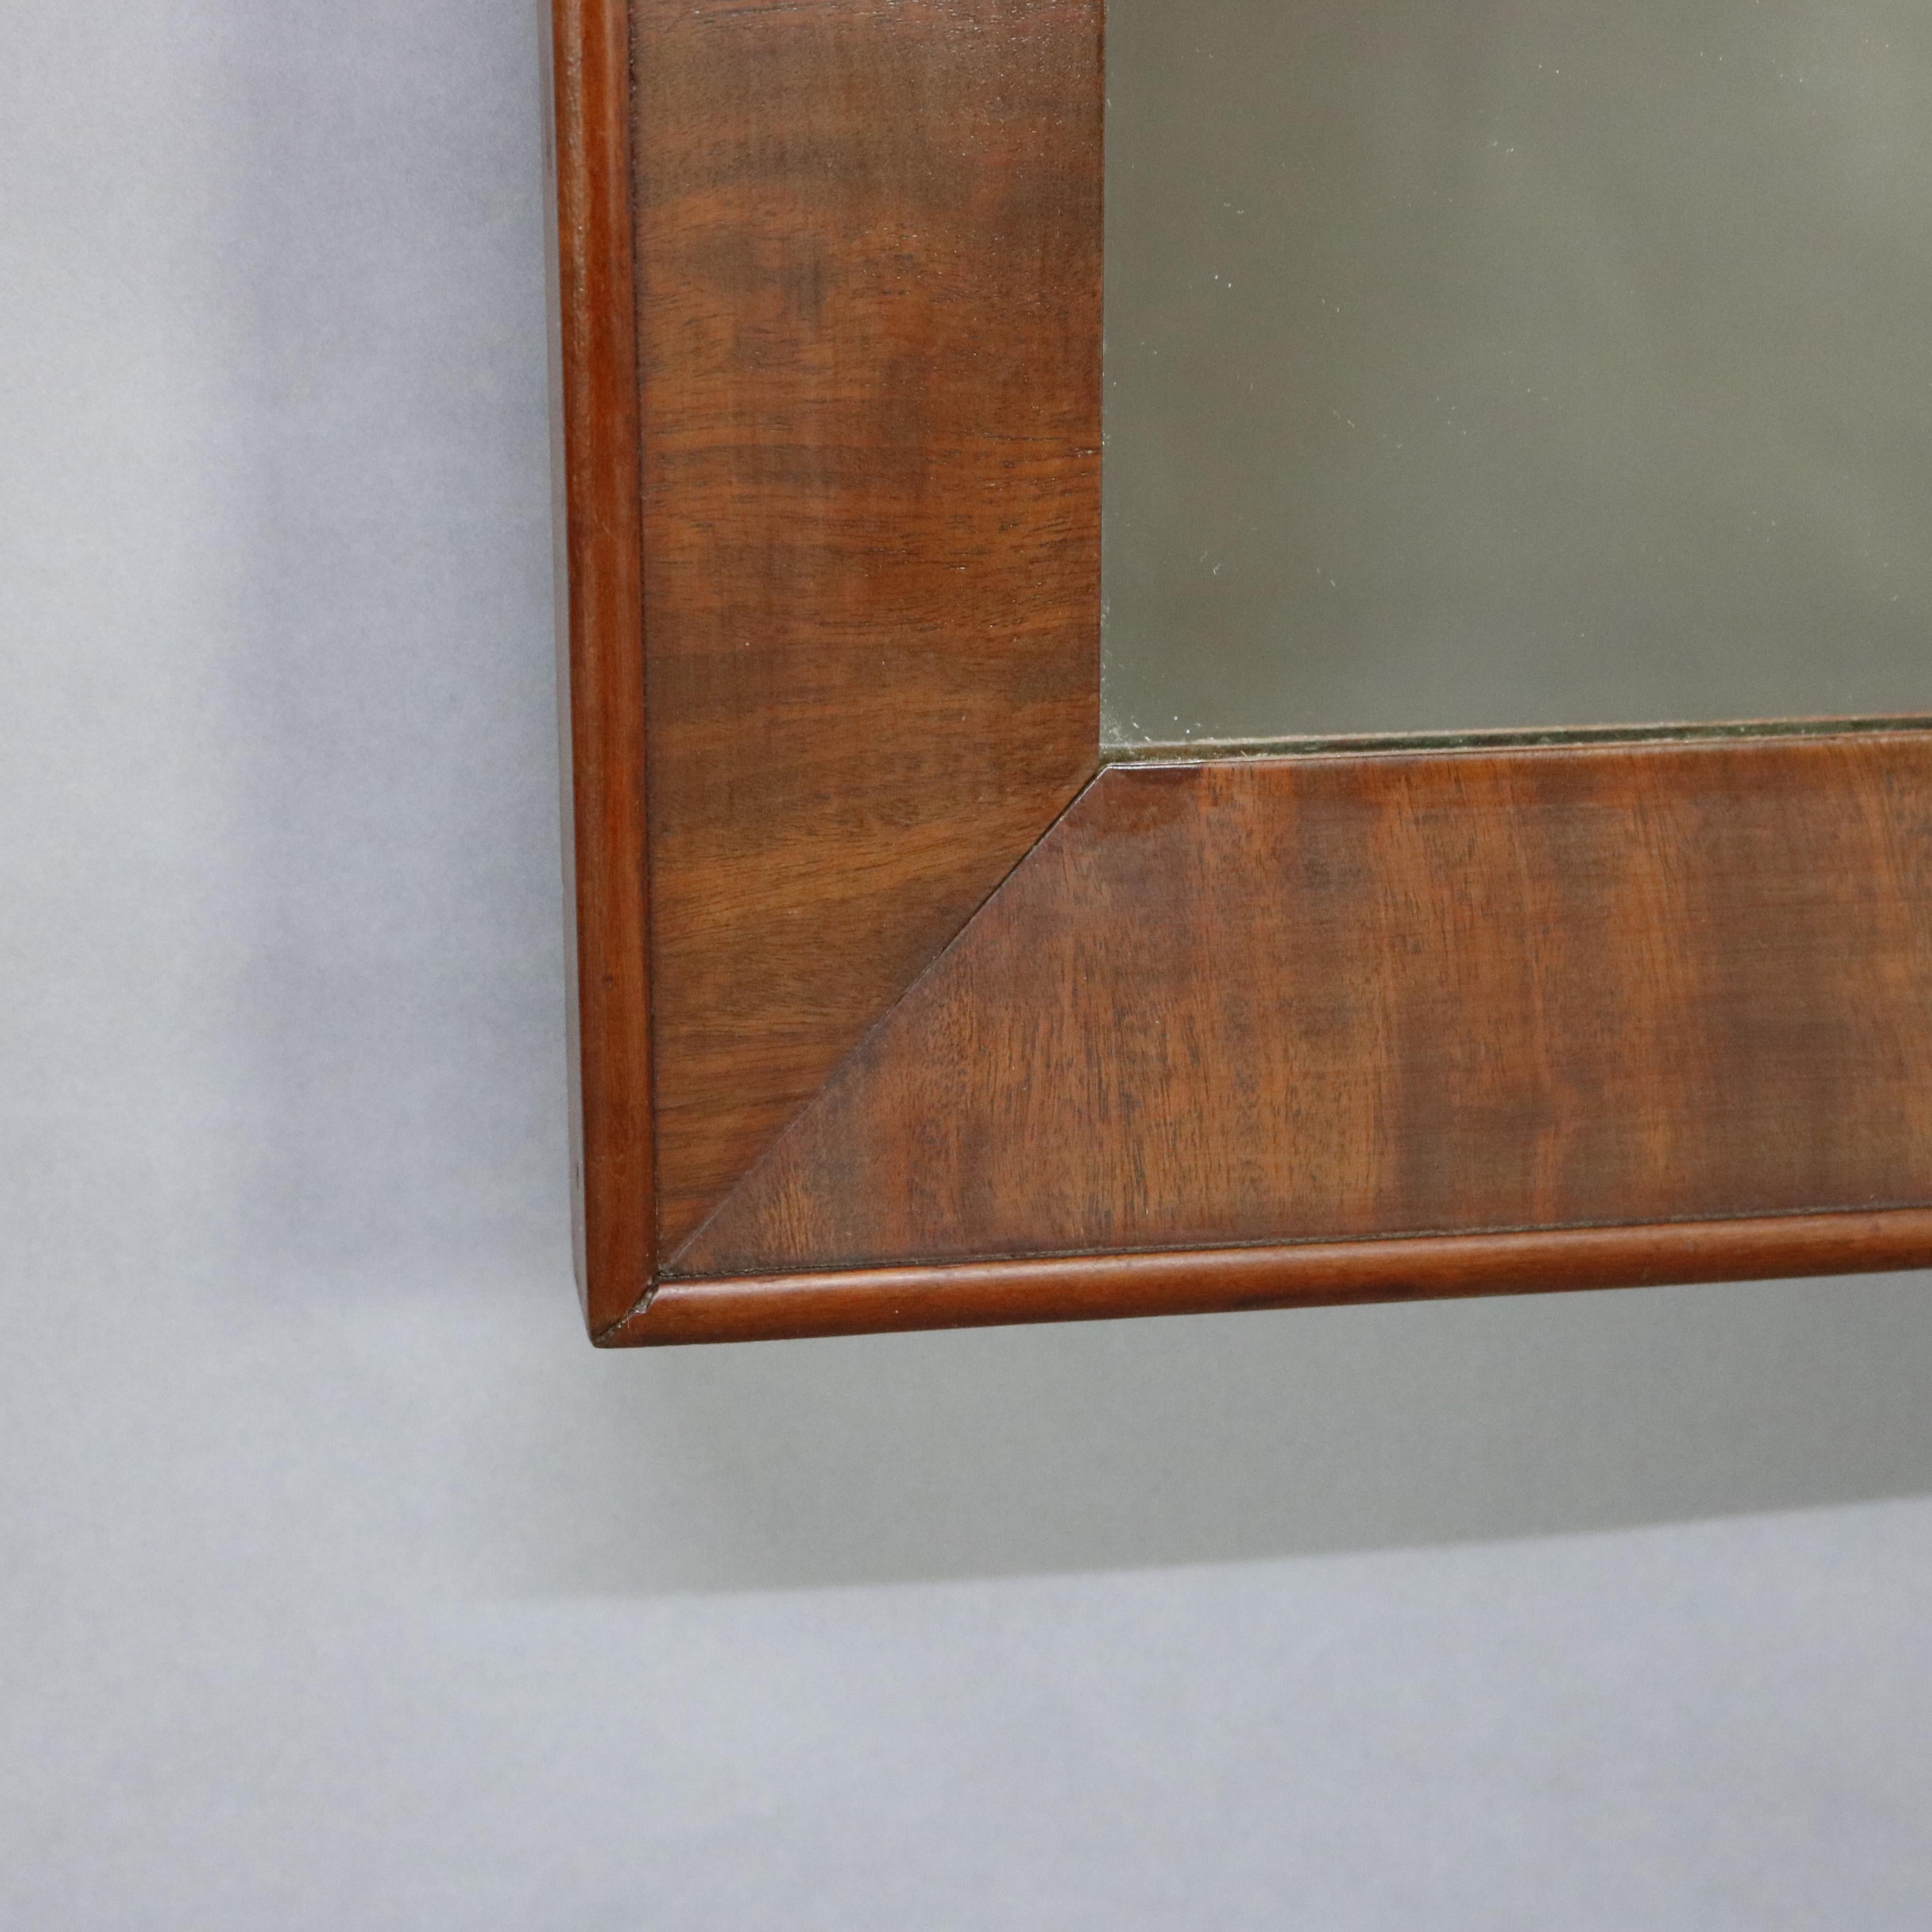 Antique American Empire Englomise Flame Mahogany Trumeau Wall Mirror, c1840 For Sale 3